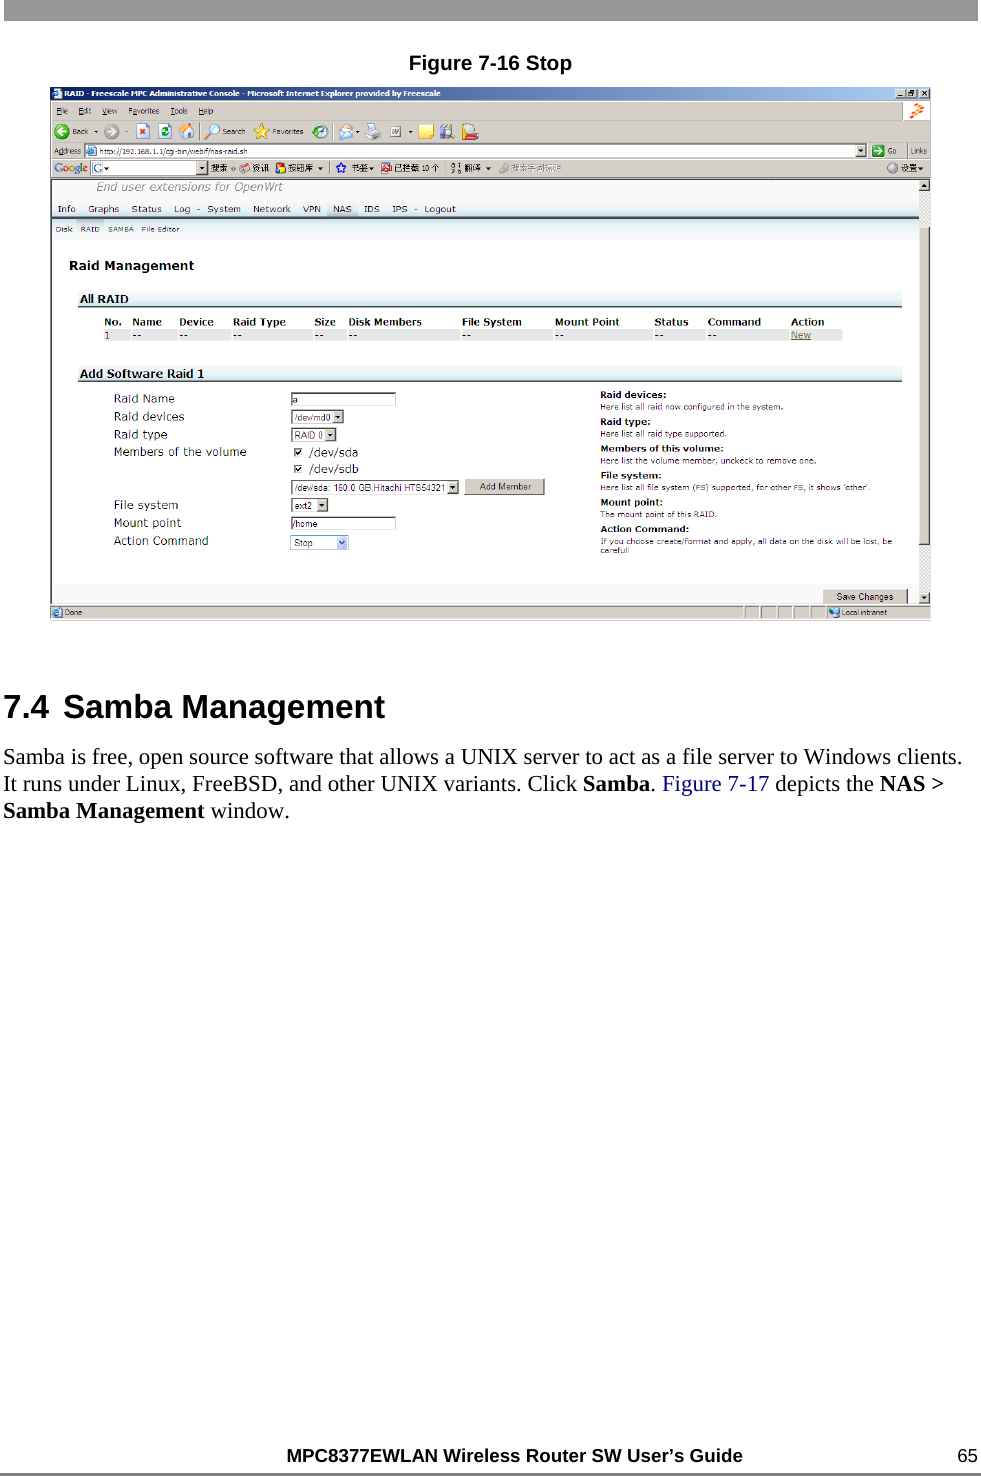                                                          MPC8377EWLAN Wireless Router SW User’s Guide    65 Figure 7-16 Stop  7.4 Samba Management Samba is free, open source software that allows a UNIX server to act as a file server to Windows clients. It runs under Linux, FreeBSD, and other UNIX variants. Click Samba. Figure 7-17 depicts the NAS &gt; Samba Management window. 